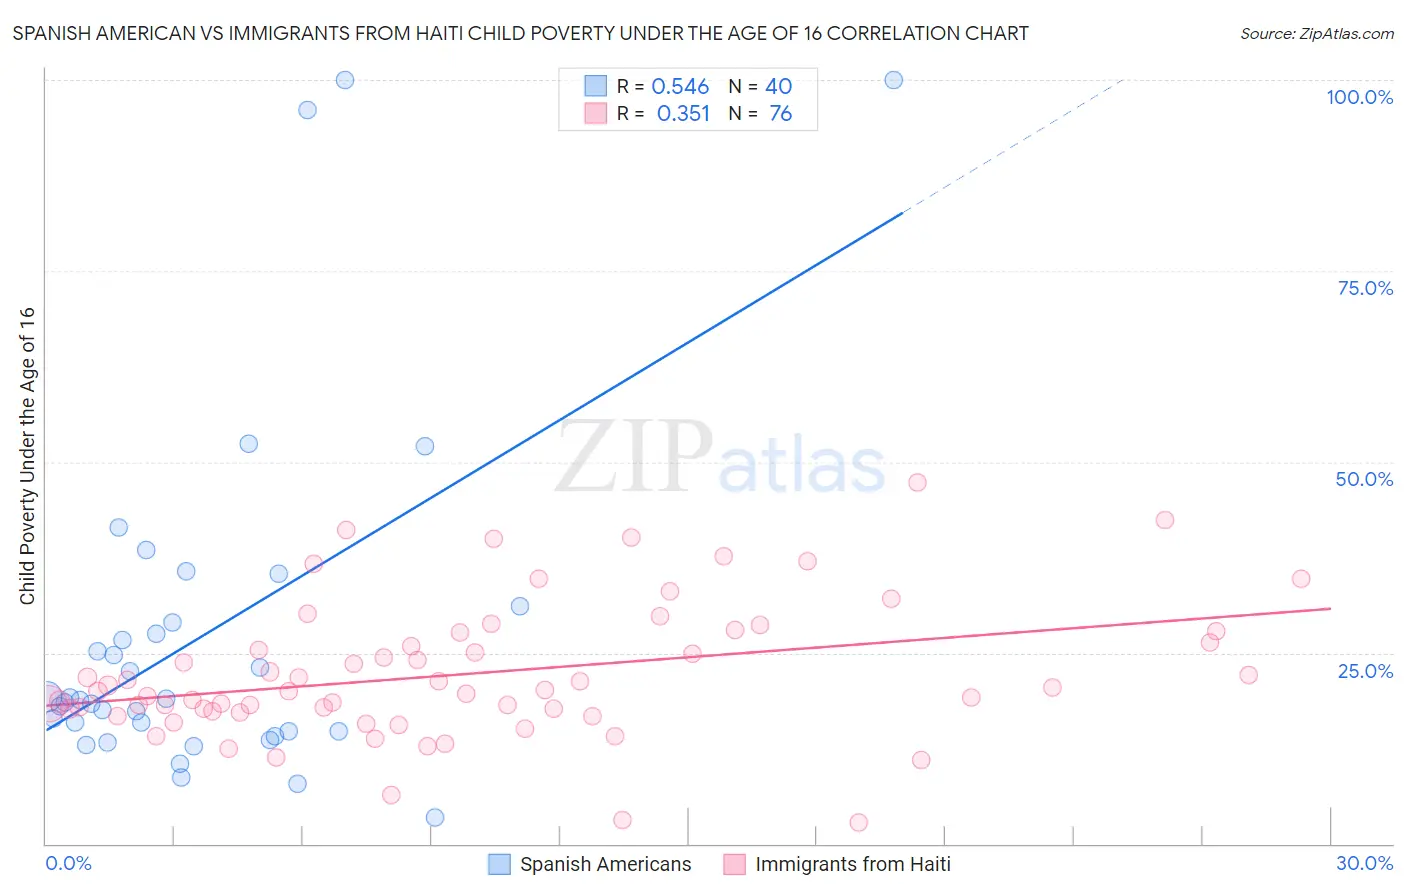 Spanish American vs Immigrants from Haiti Child Poverty Under the Age of 16